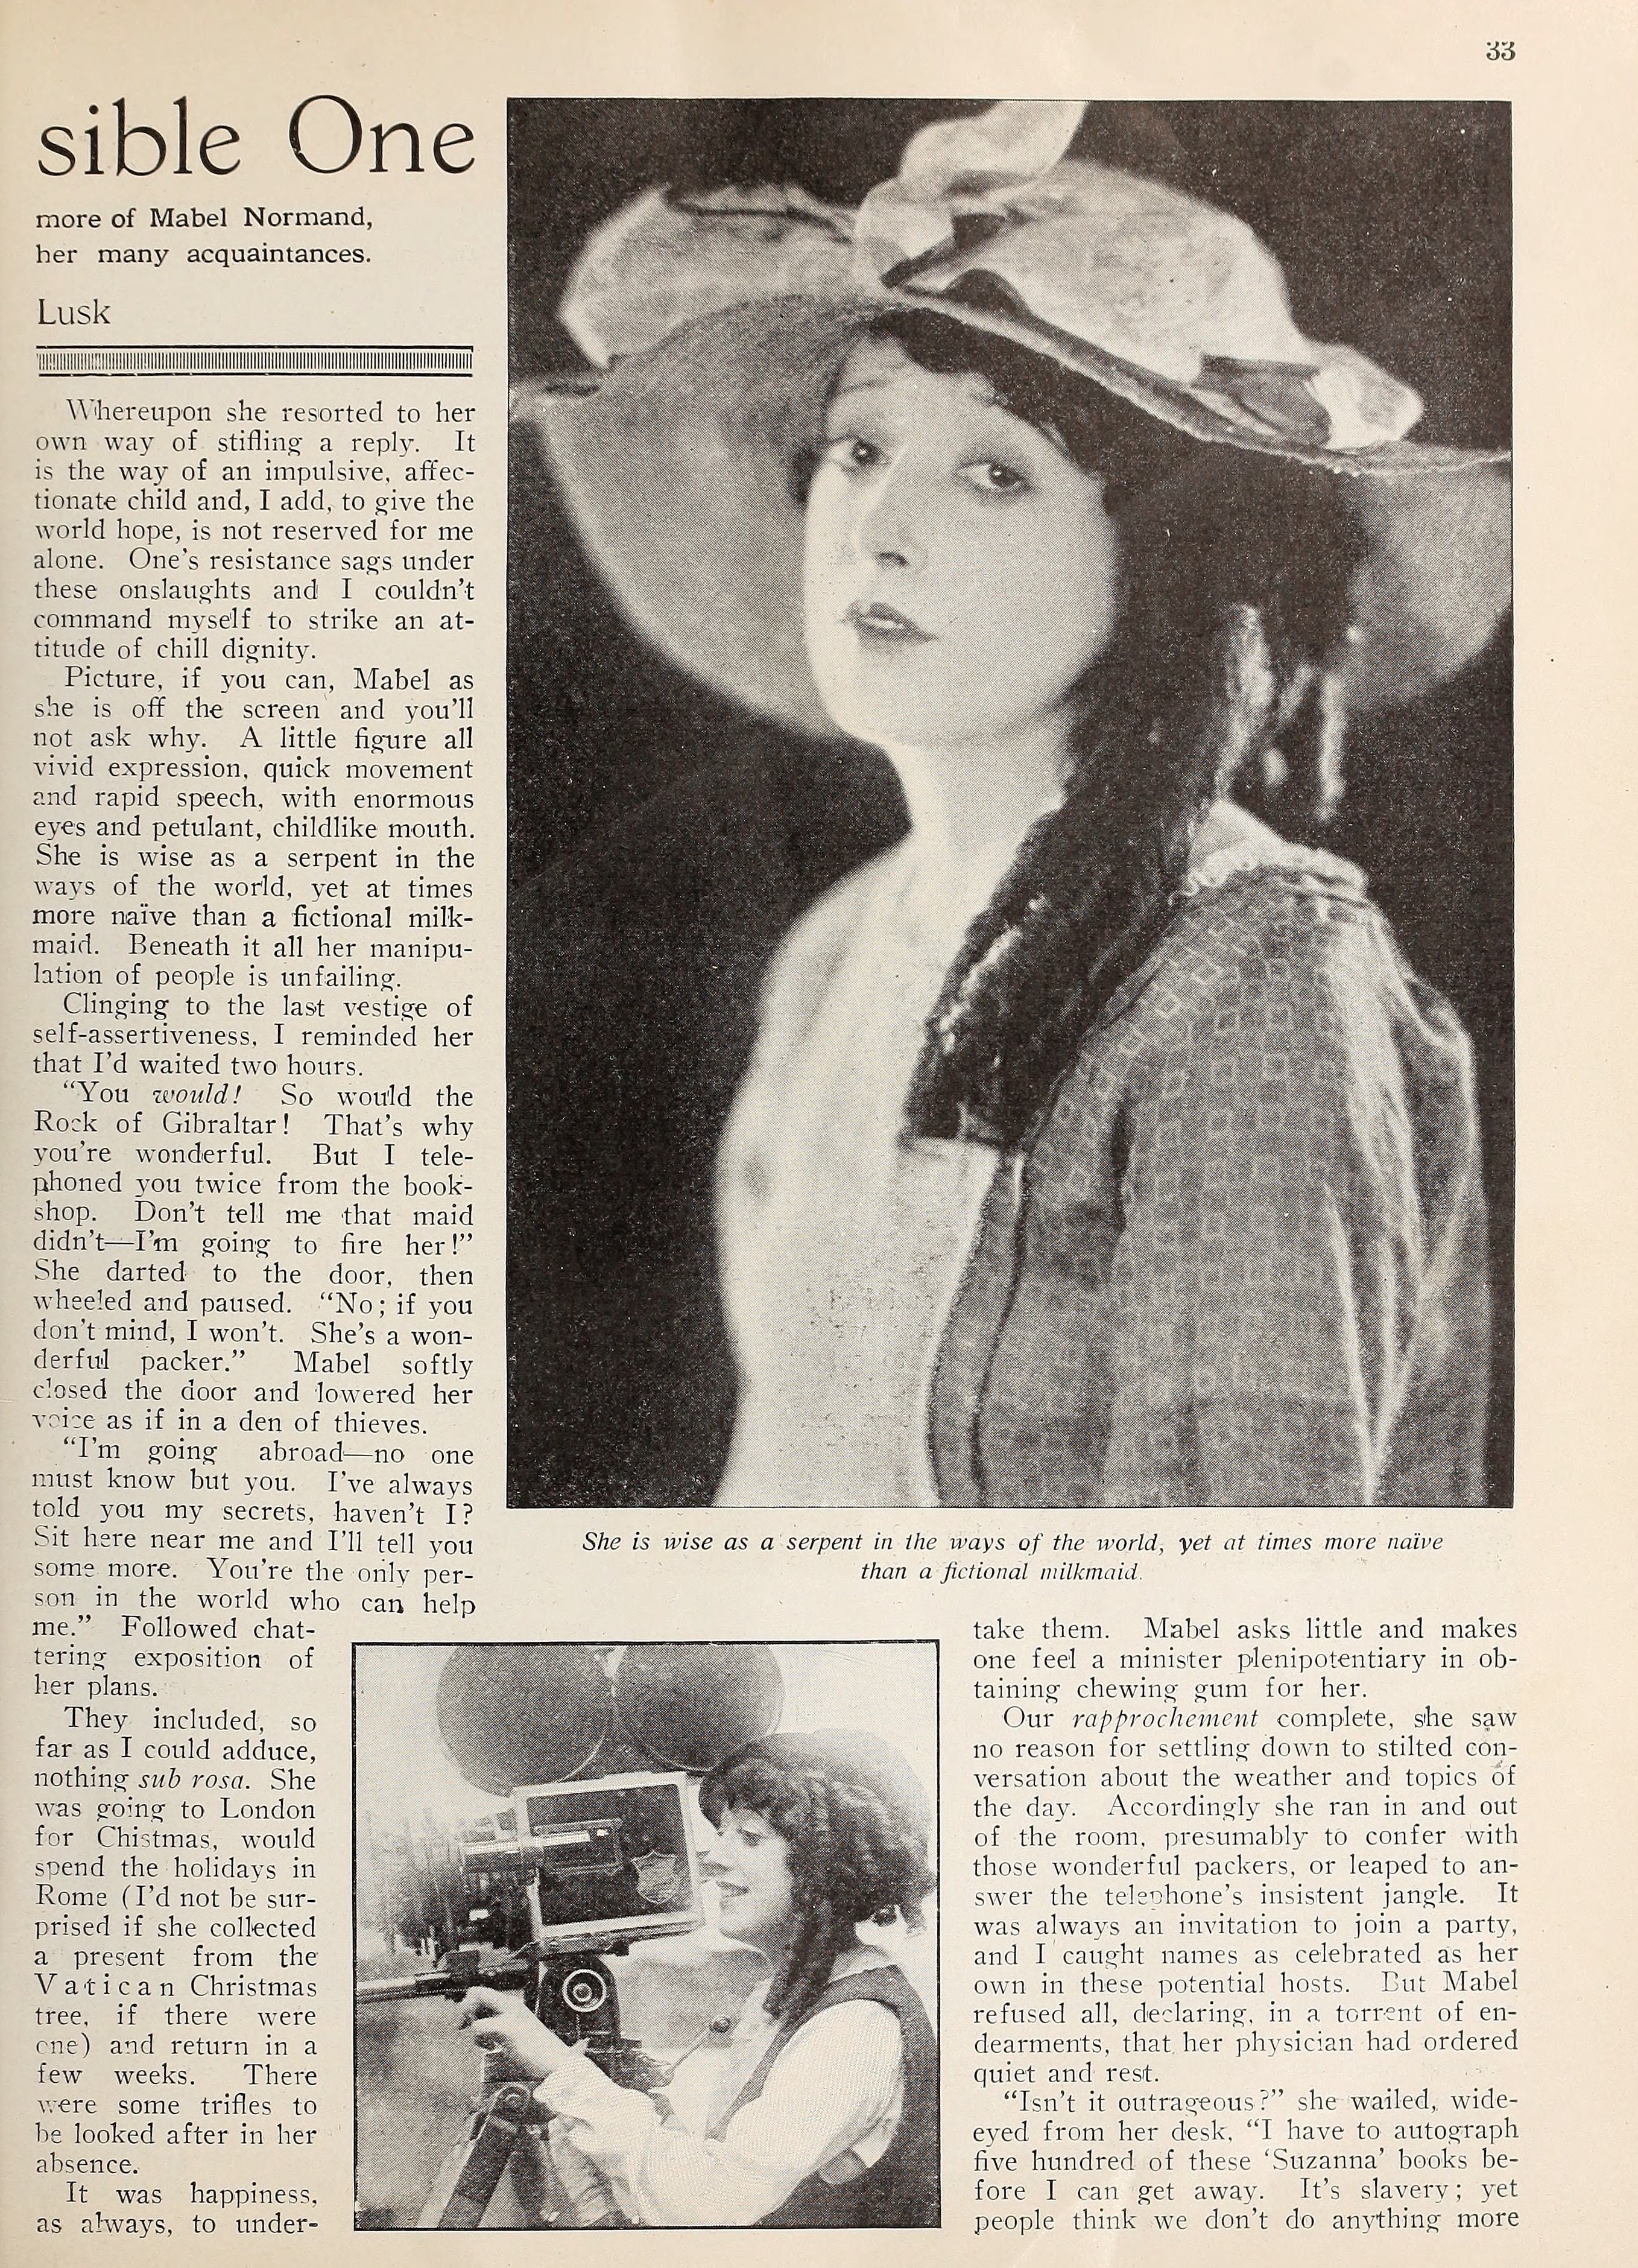 Mabel Normand — The Irrepressible One (1923) | www.vintoz.com